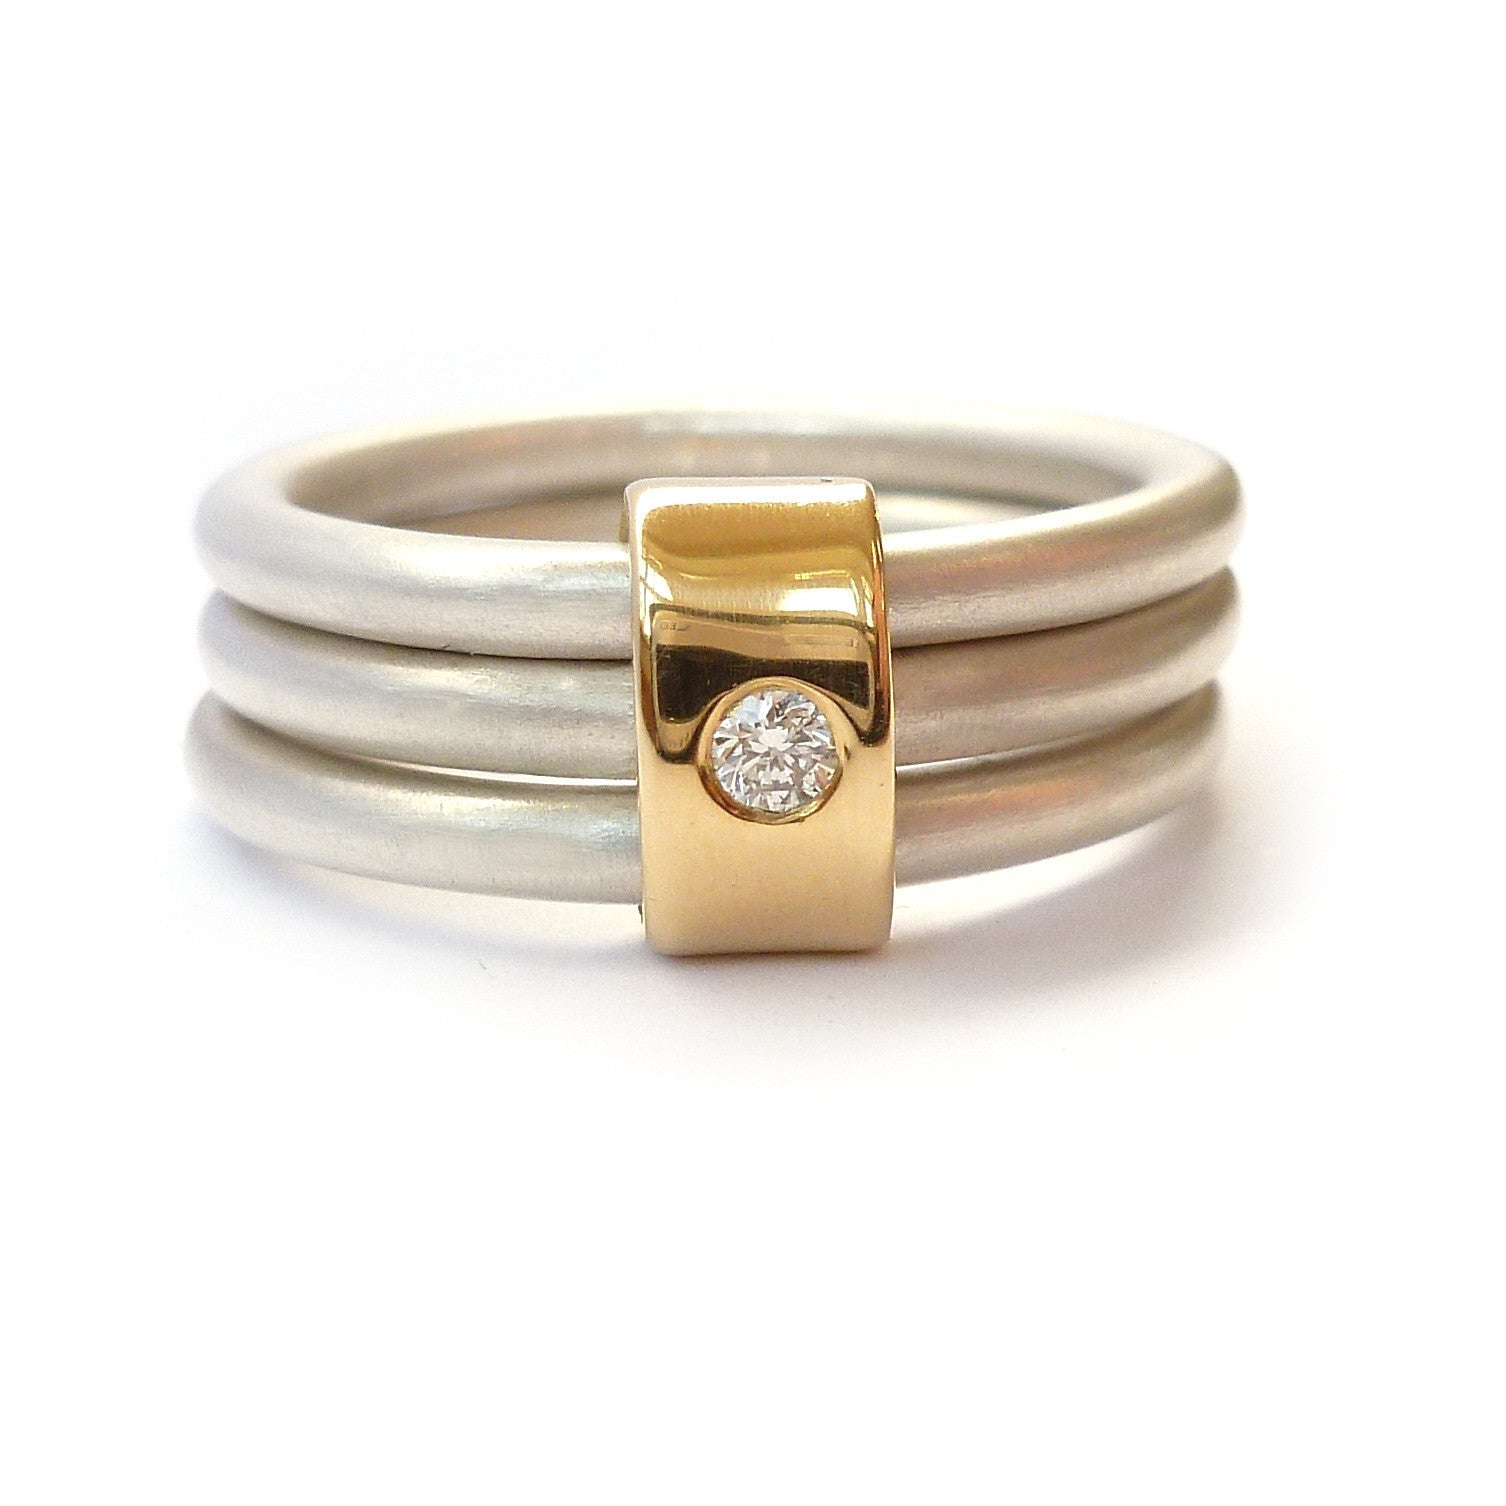 Silver and 18ct gold and diamond ring